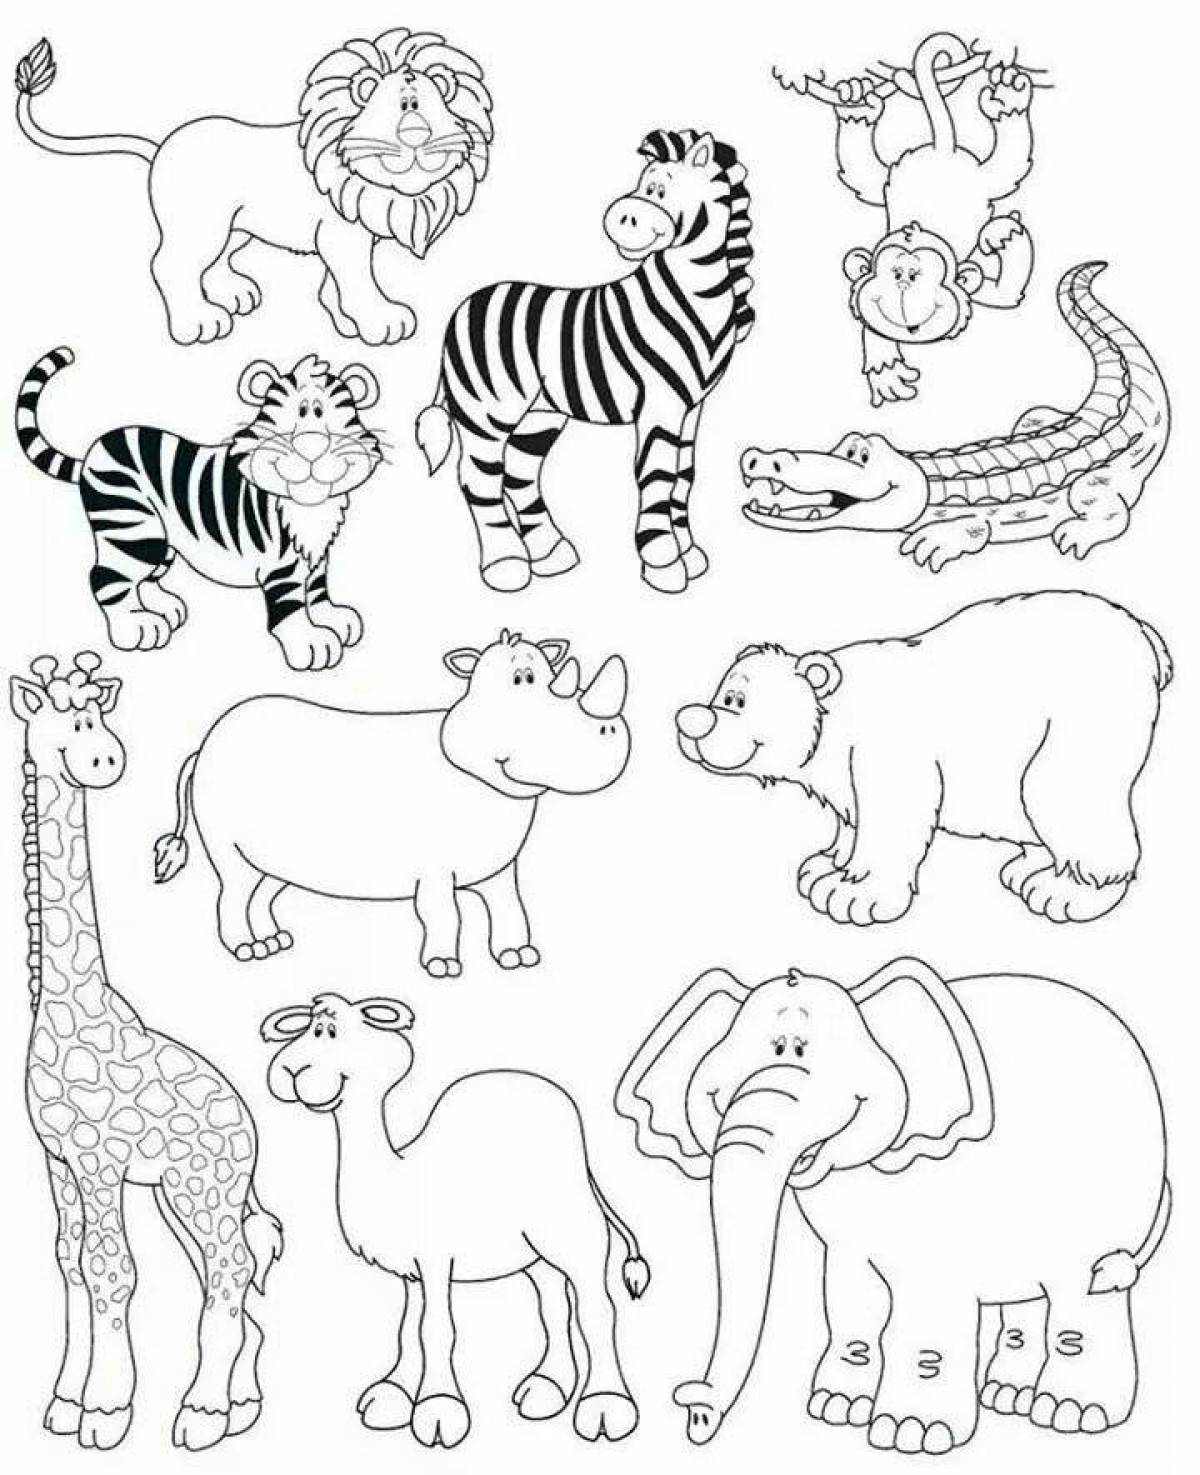 Cute hot country animals coloring book for preschoolers